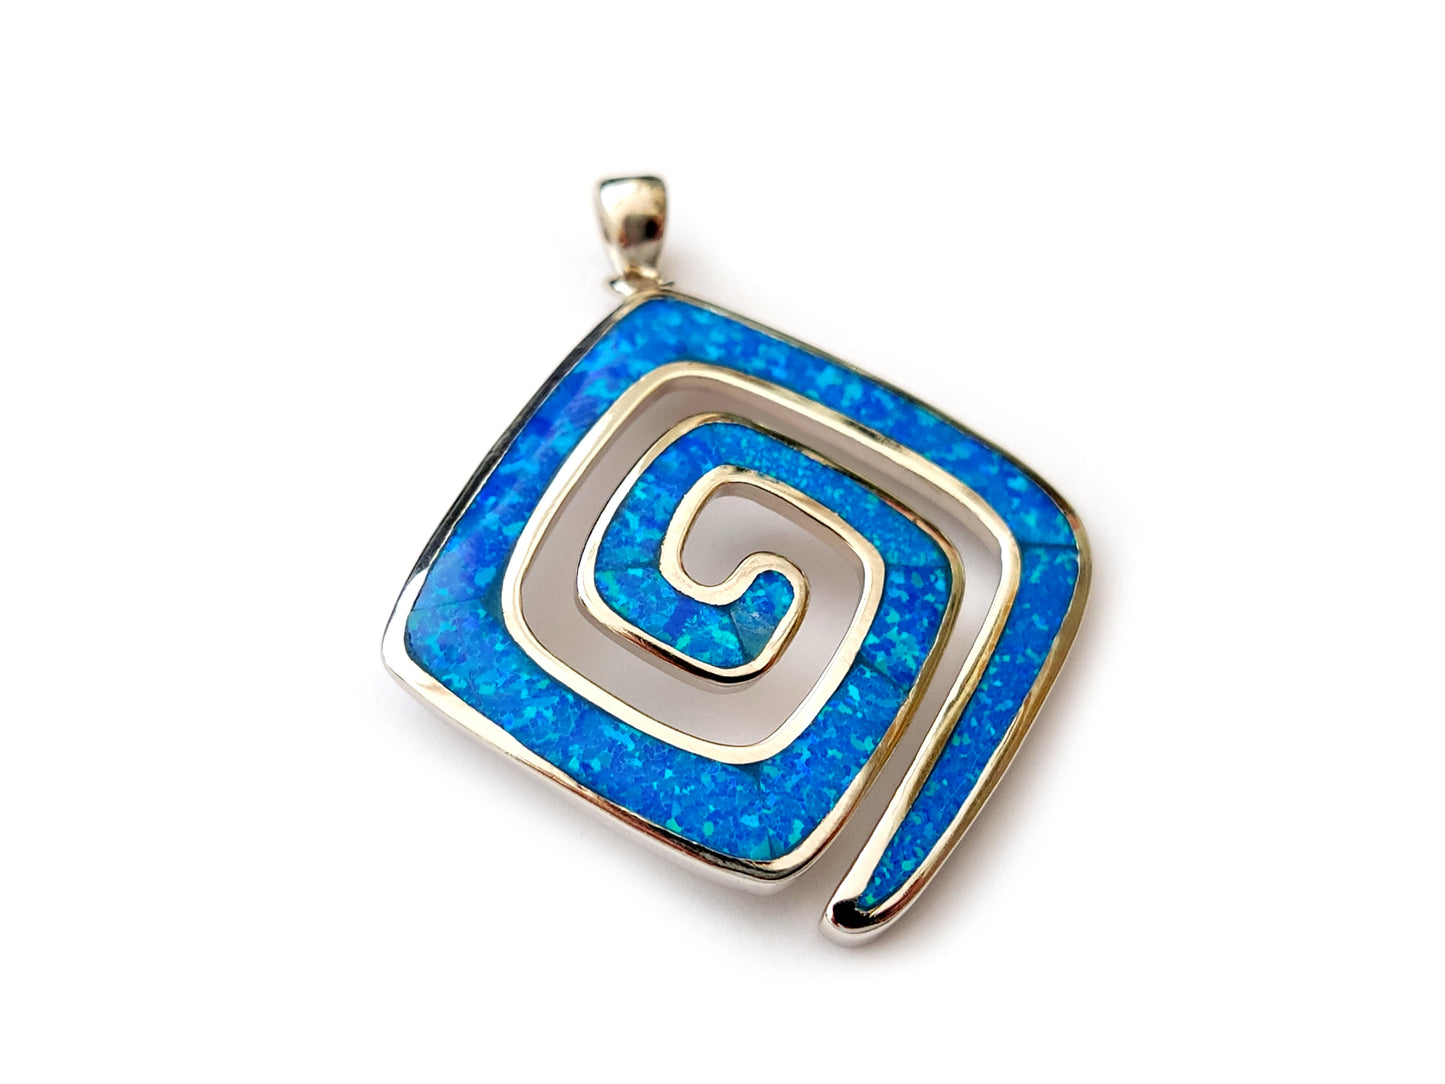 Greek Key Meander pendant made of sterling silver 925 and blue opal stones measuring 27mm placed on white background.